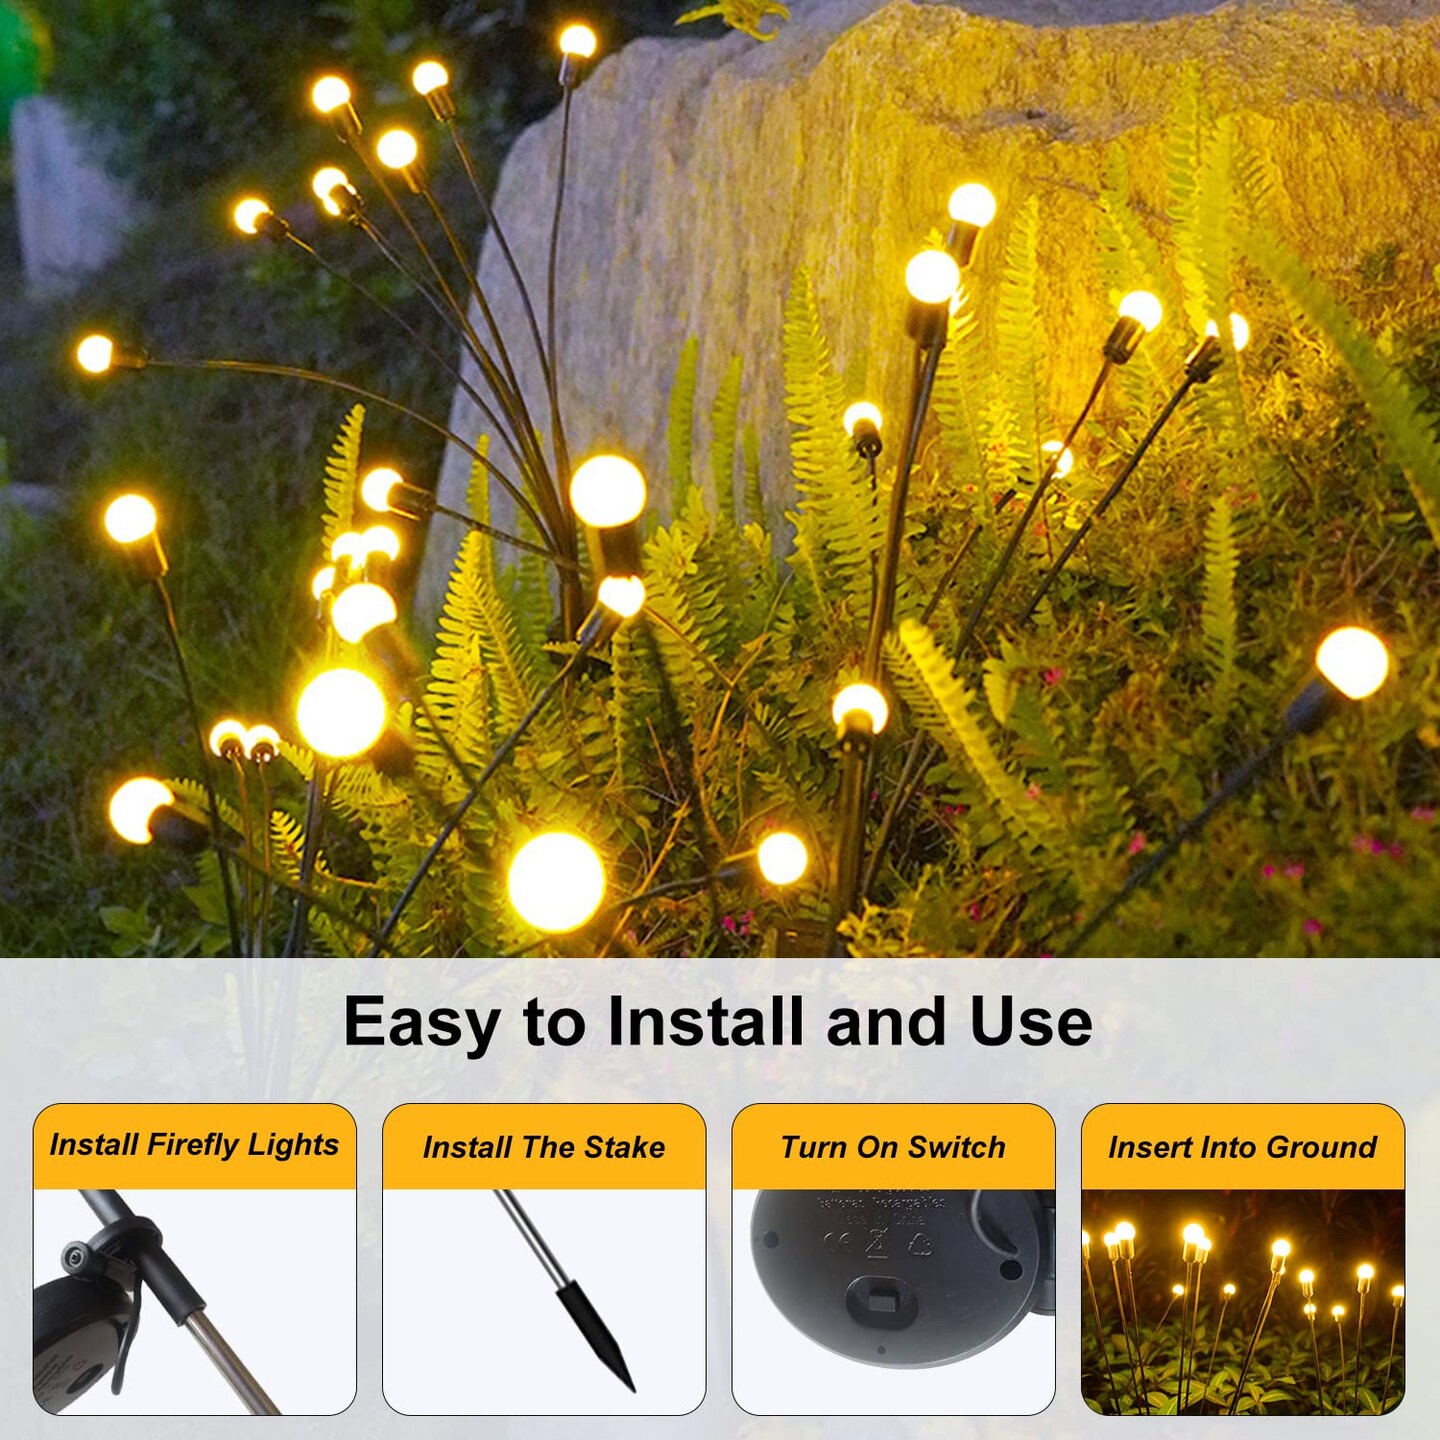 2 Pack Solar Garden Lights, Outdoor Solar Lights for Outside, Firefly Lights Outdoor Waterproof for Landscape, Pathway, Yard, Patio D&#xE9;cor, Solar Starburst Swaying Lights When Wind Blows(Warm White)